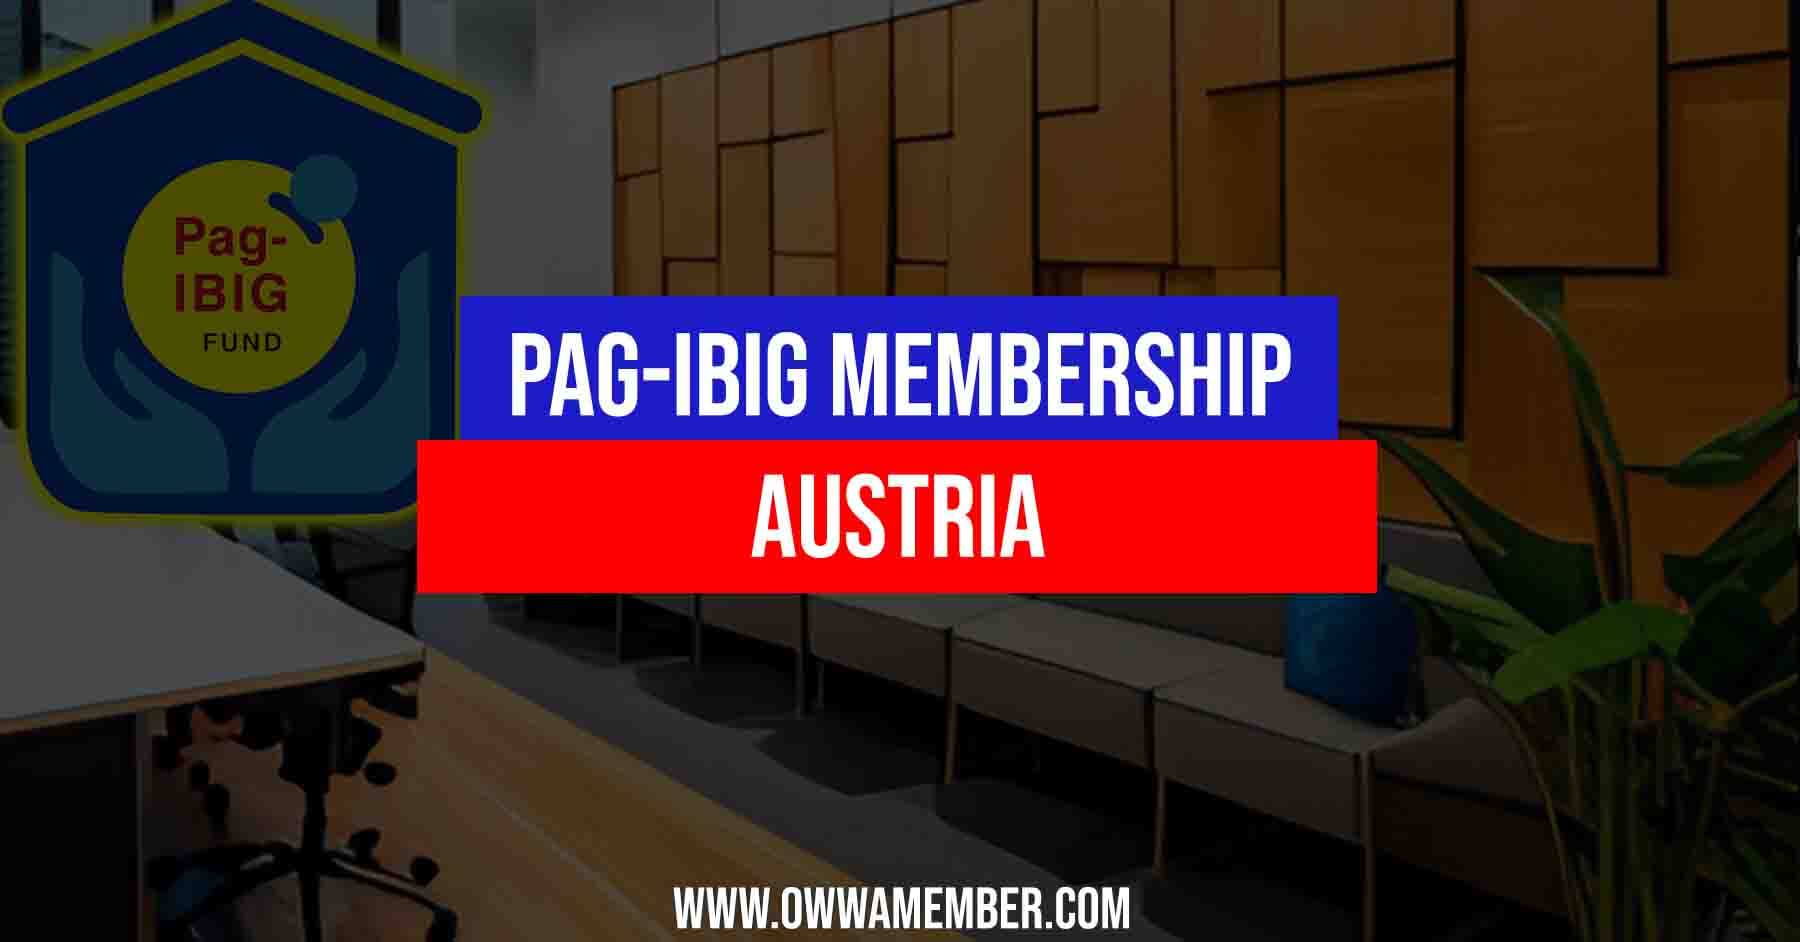 how to apply pagibig membership in austria